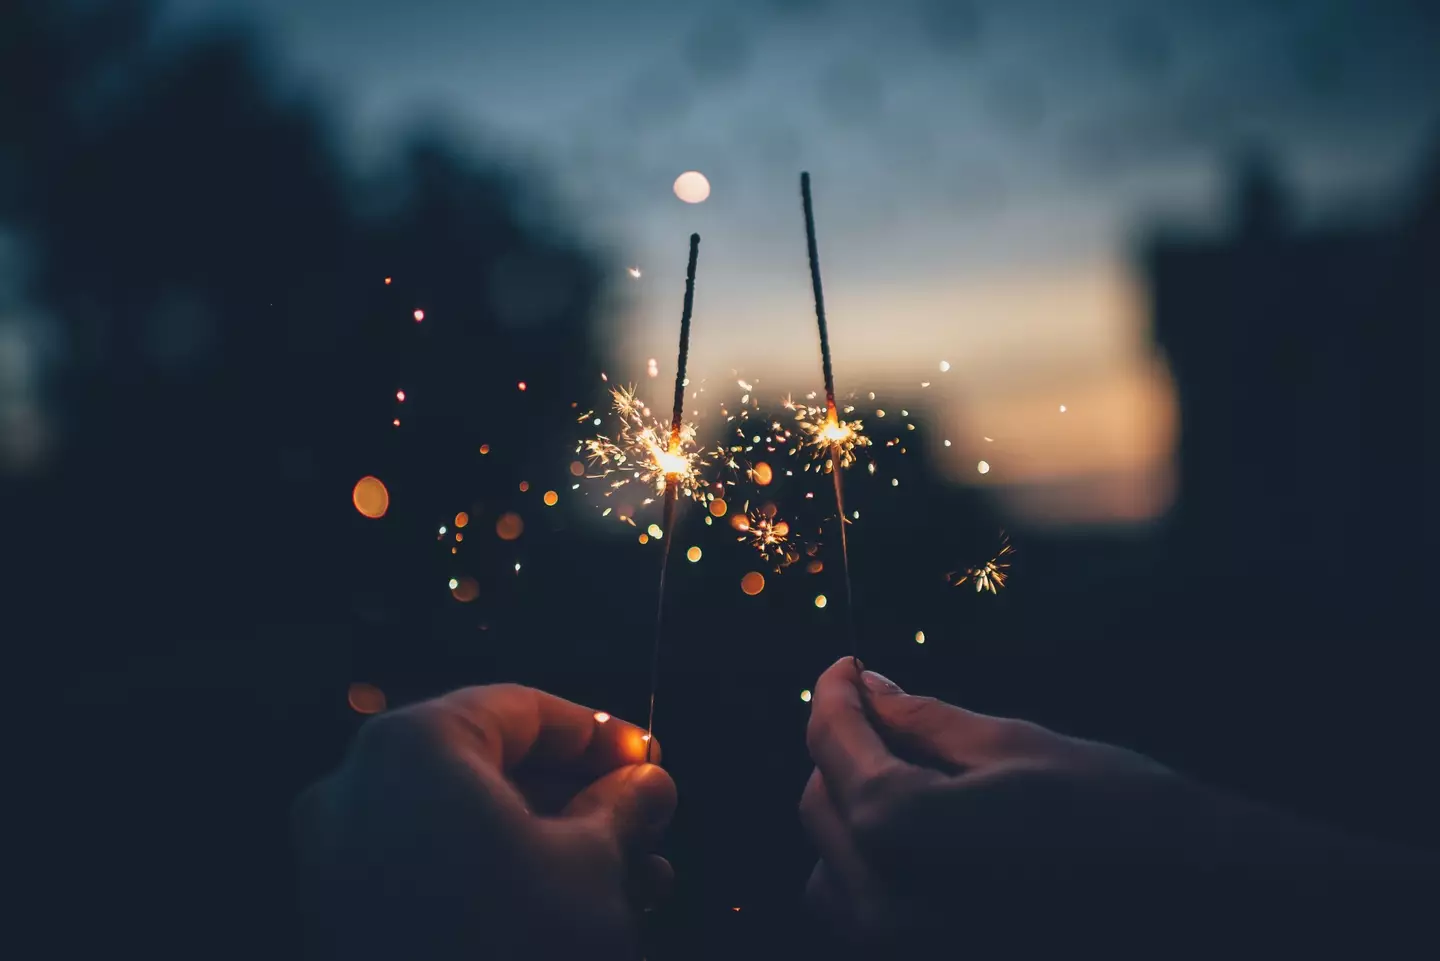 Sparklers may hurt little fingers (